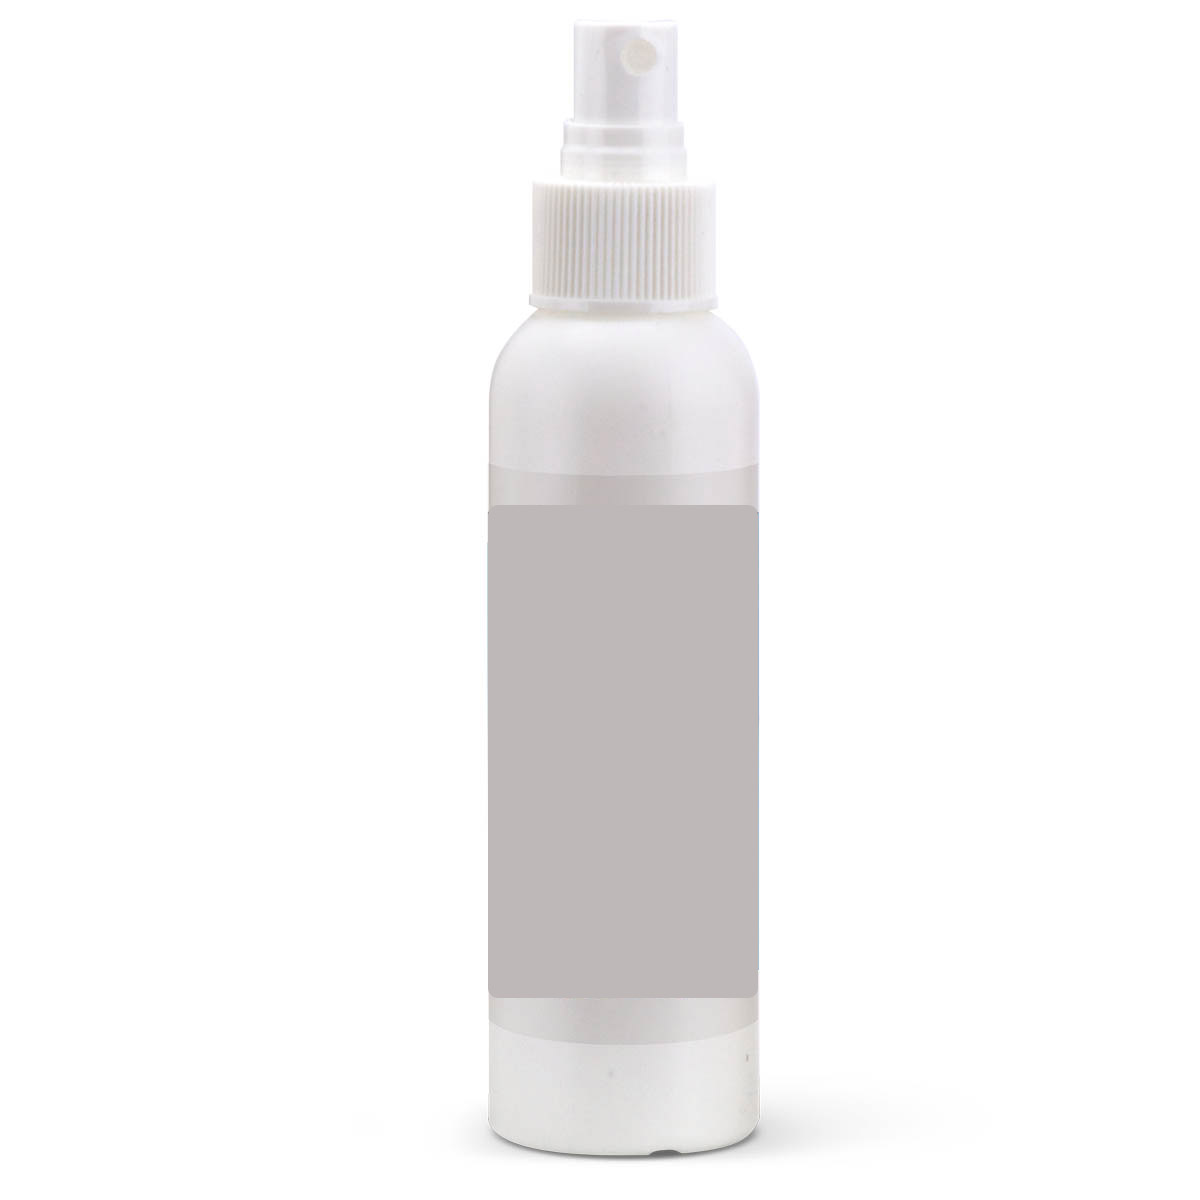 White Insect Repellent Spray - 4 Oz